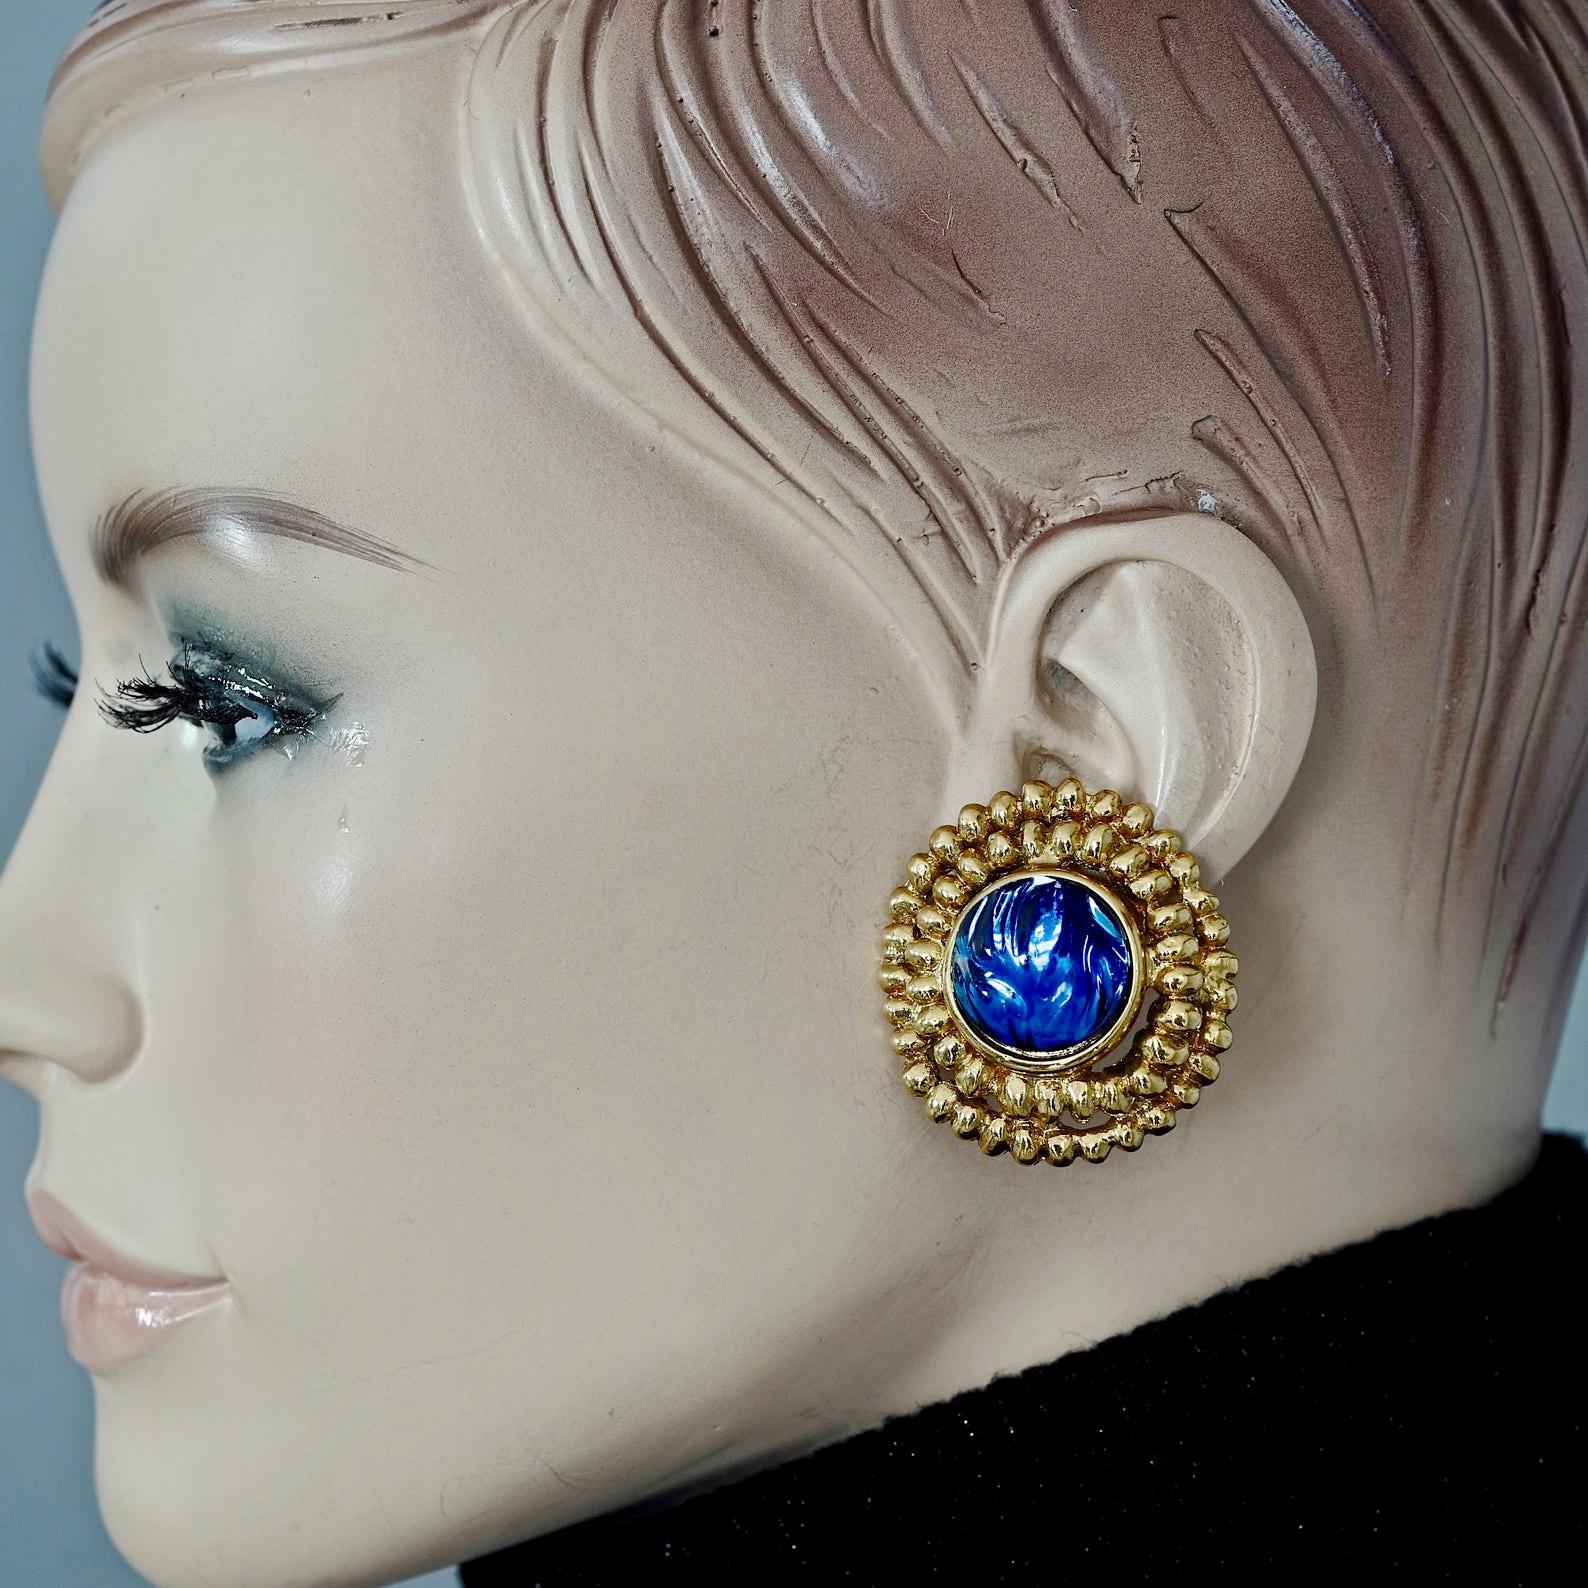 Vintage YVES SAINT LAURENT Ysl Blue Resin Poured Disc Earrings

Measurements:
Height: 1.57 inches (4 cm)
Width: 1.50 inches (3.81 cm)
Weight per Earring: 22 grams

Features:
- 100% Authentic YVES SAINT LAURENT.
- Dramatic irregular depth poured